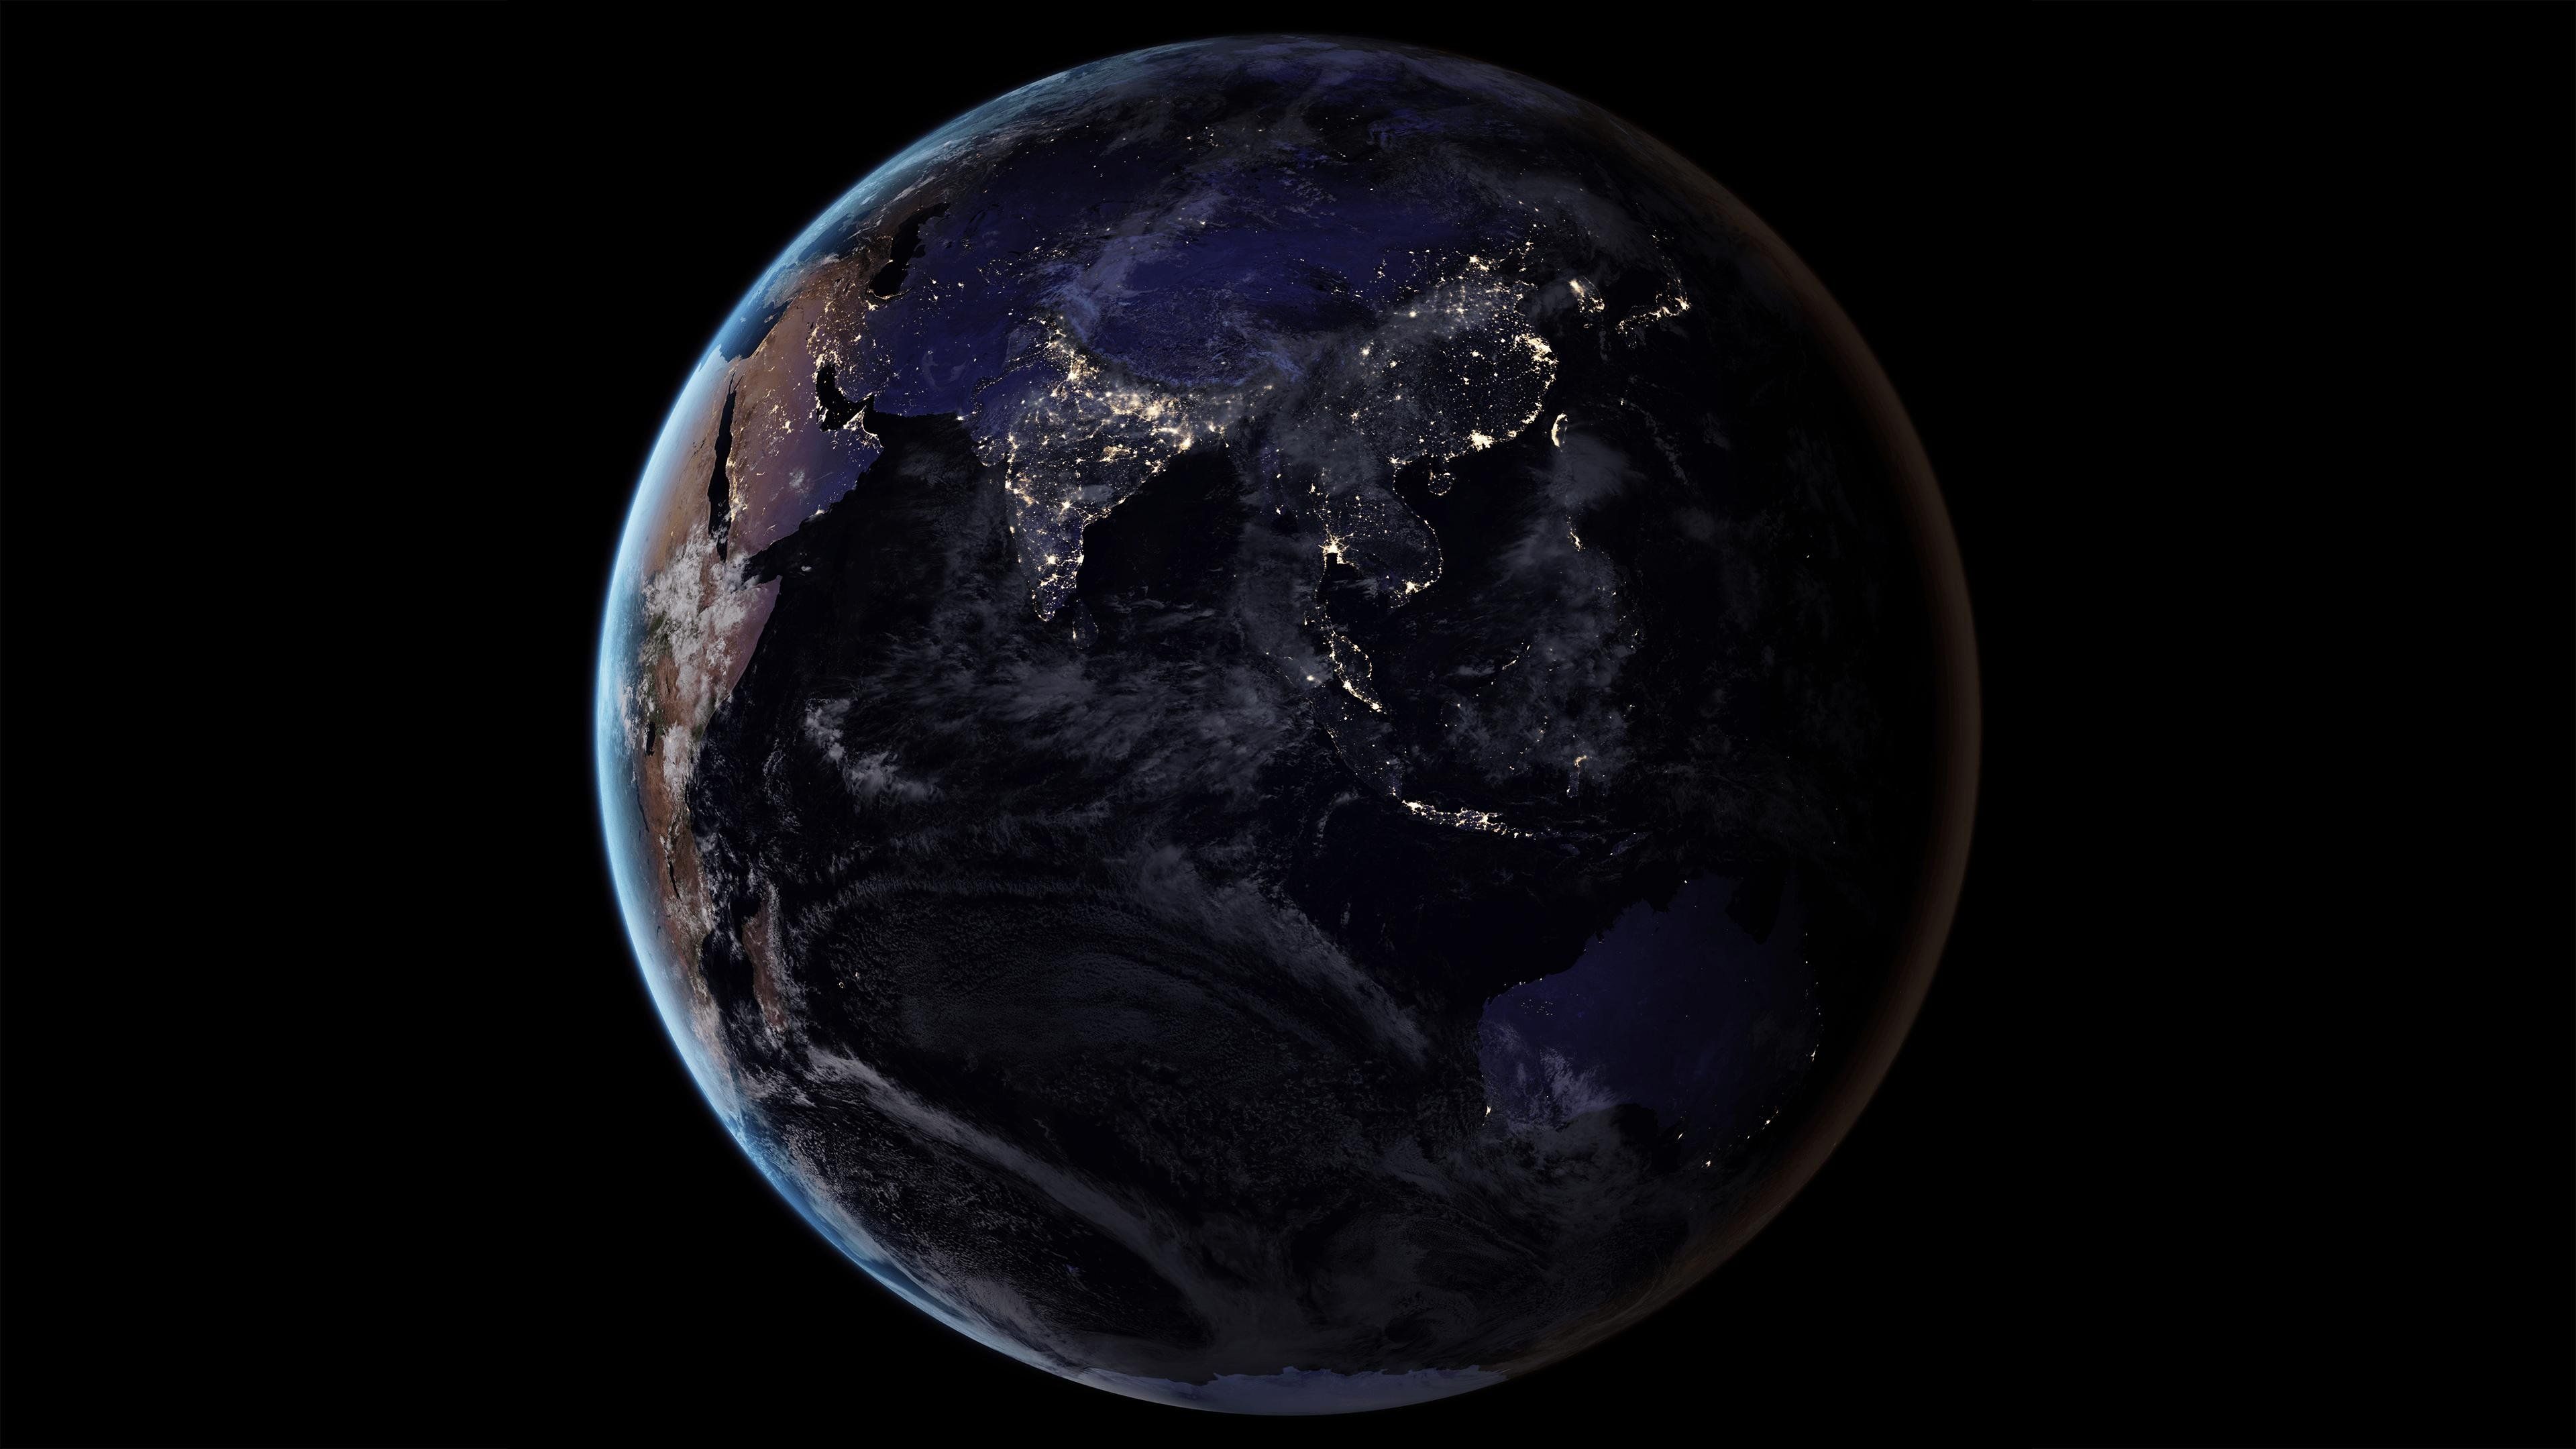 Black Marble Wallpaper From Space At Night 2019